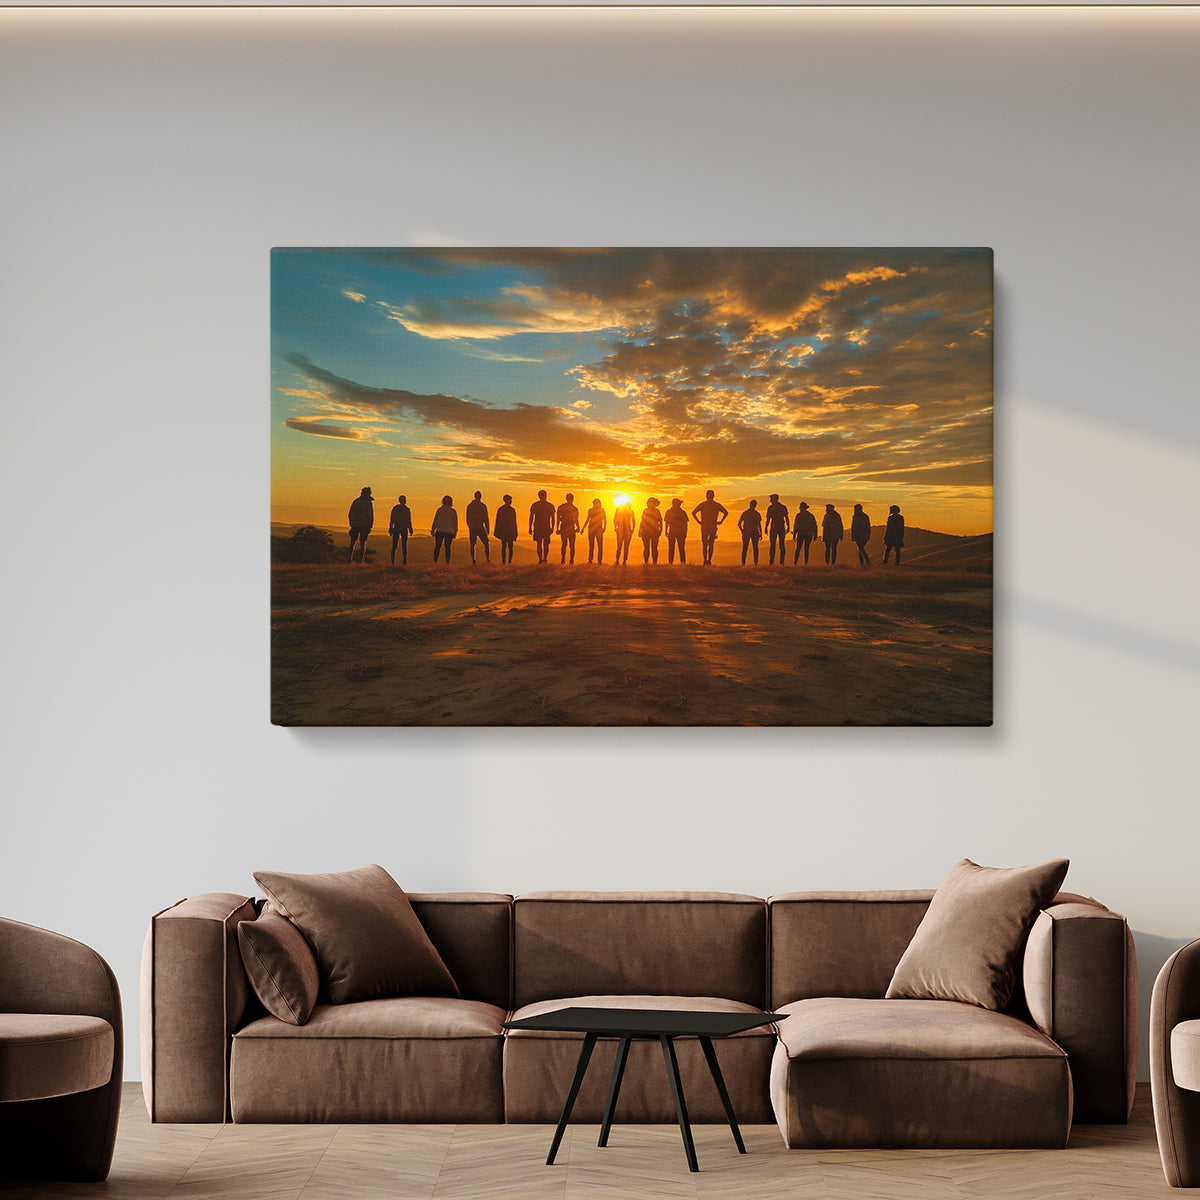 Team Building, Sports Events, Creative Workshops, Social and Charity Events Memories on Canvas Custom Canvas Prints ArtLexy   